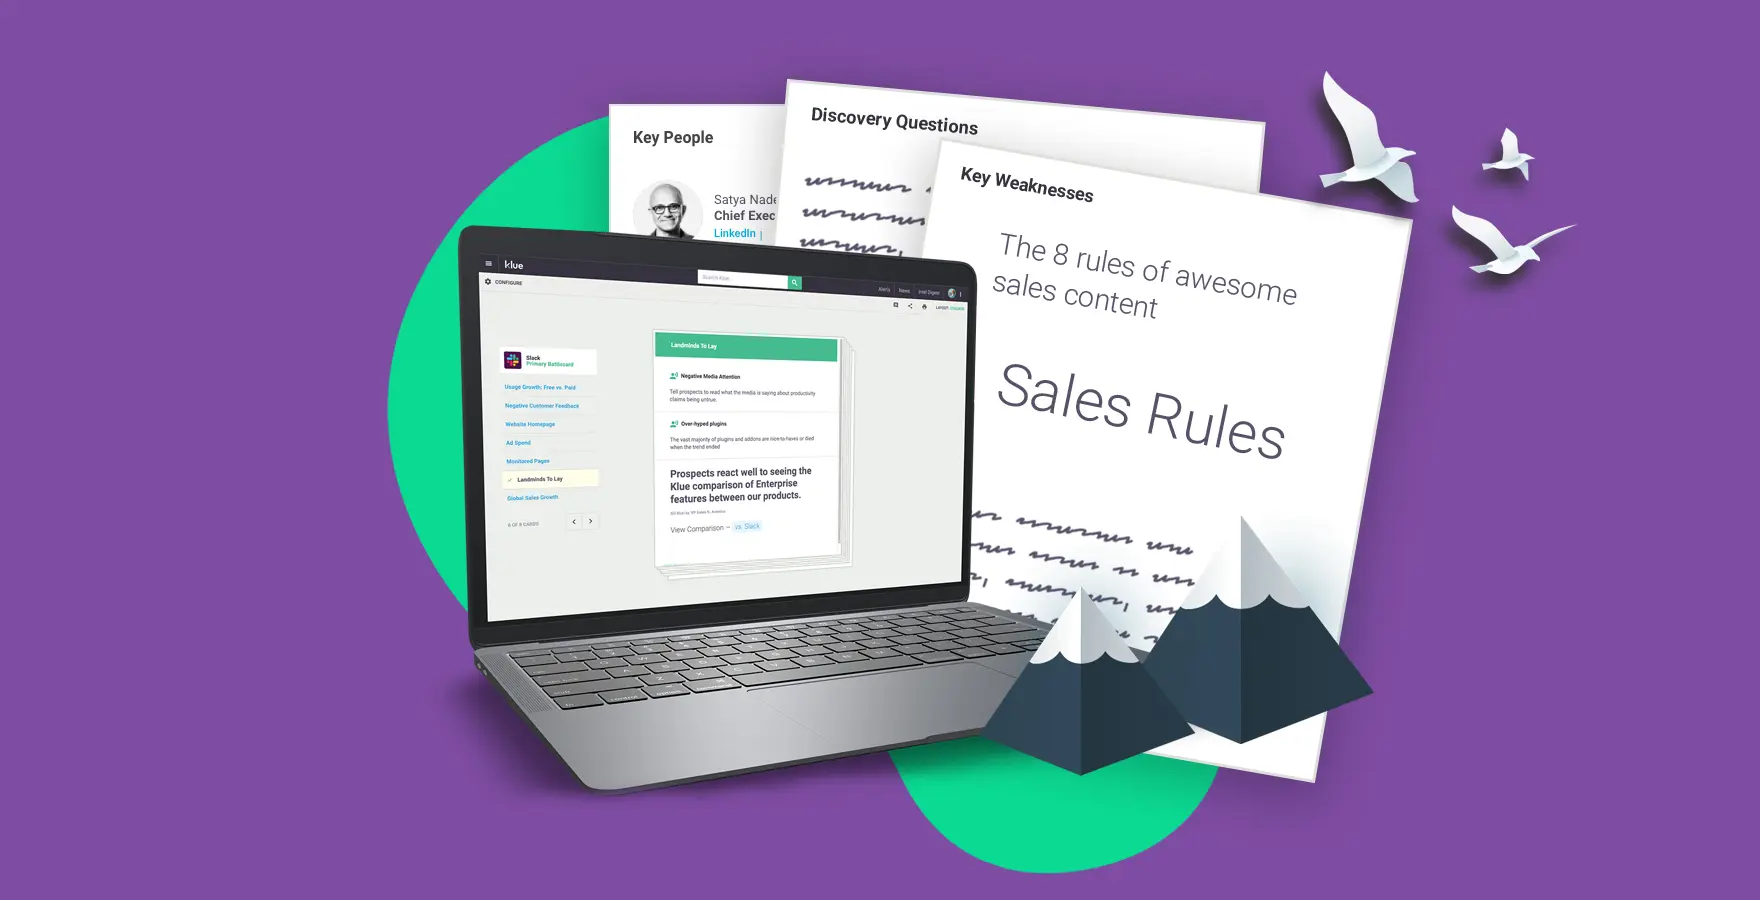 The-8-rules-of-awesome-sales-content-1